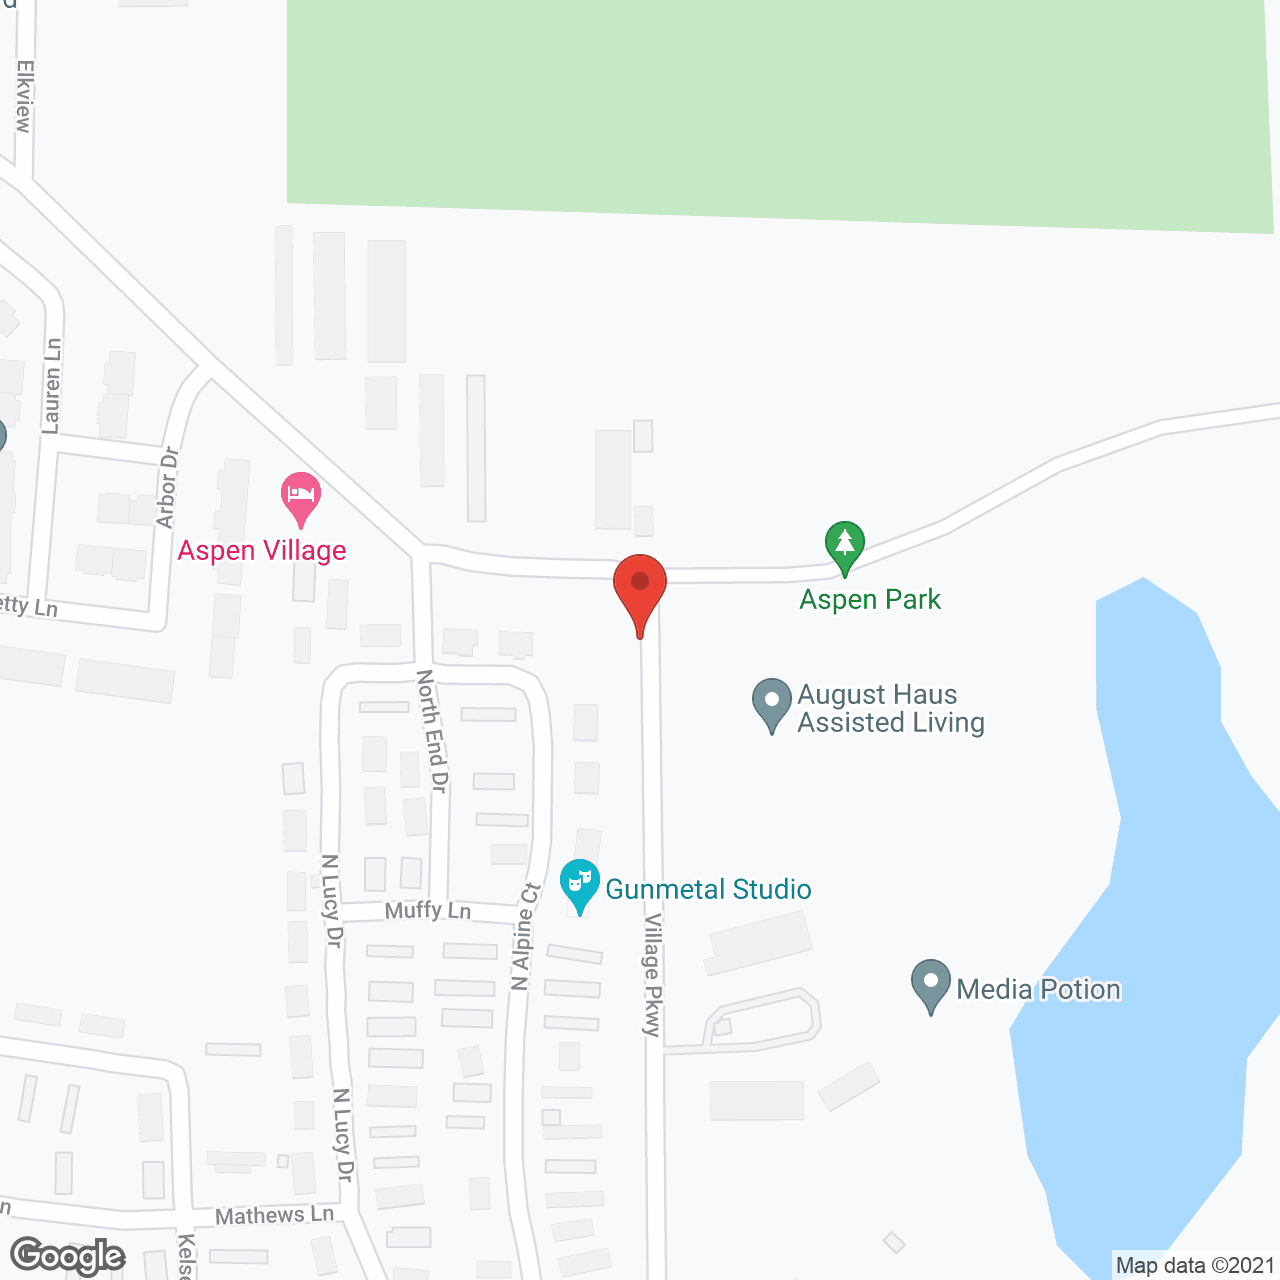 August Haus in google map